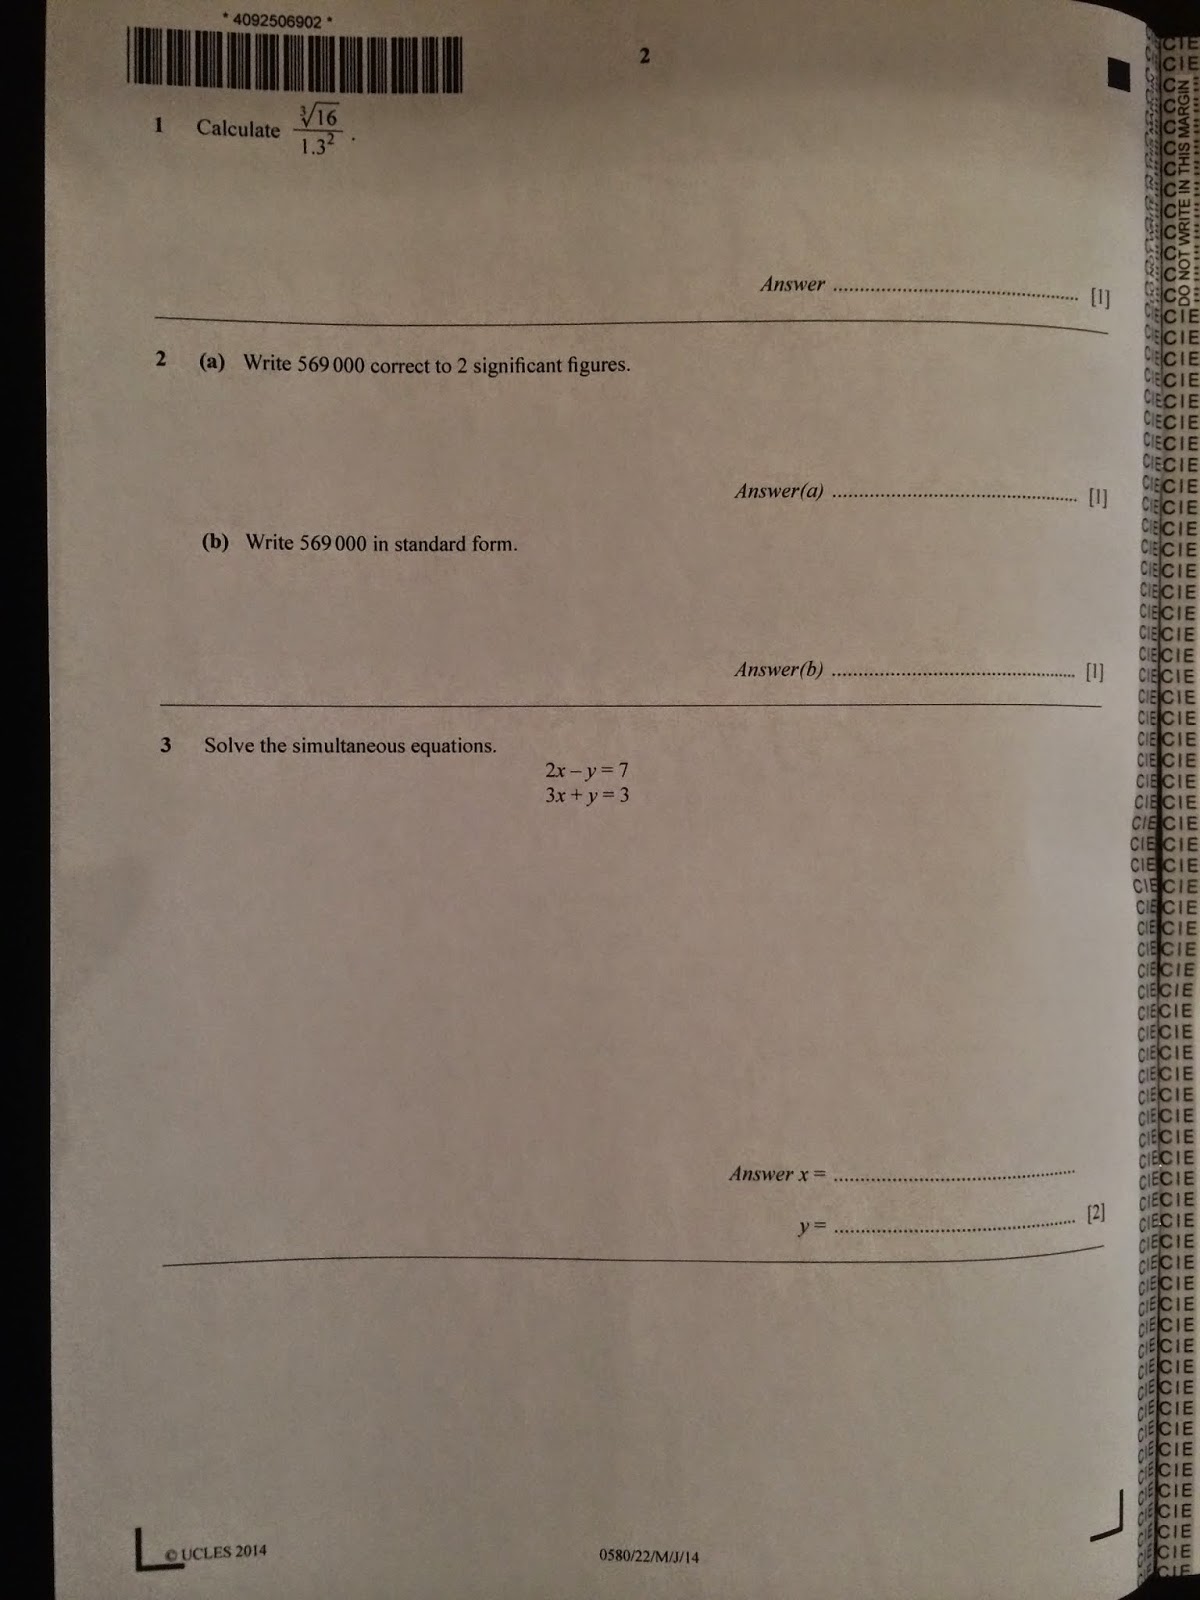 Buy research papers online cheap math 2010 igsce paper 4